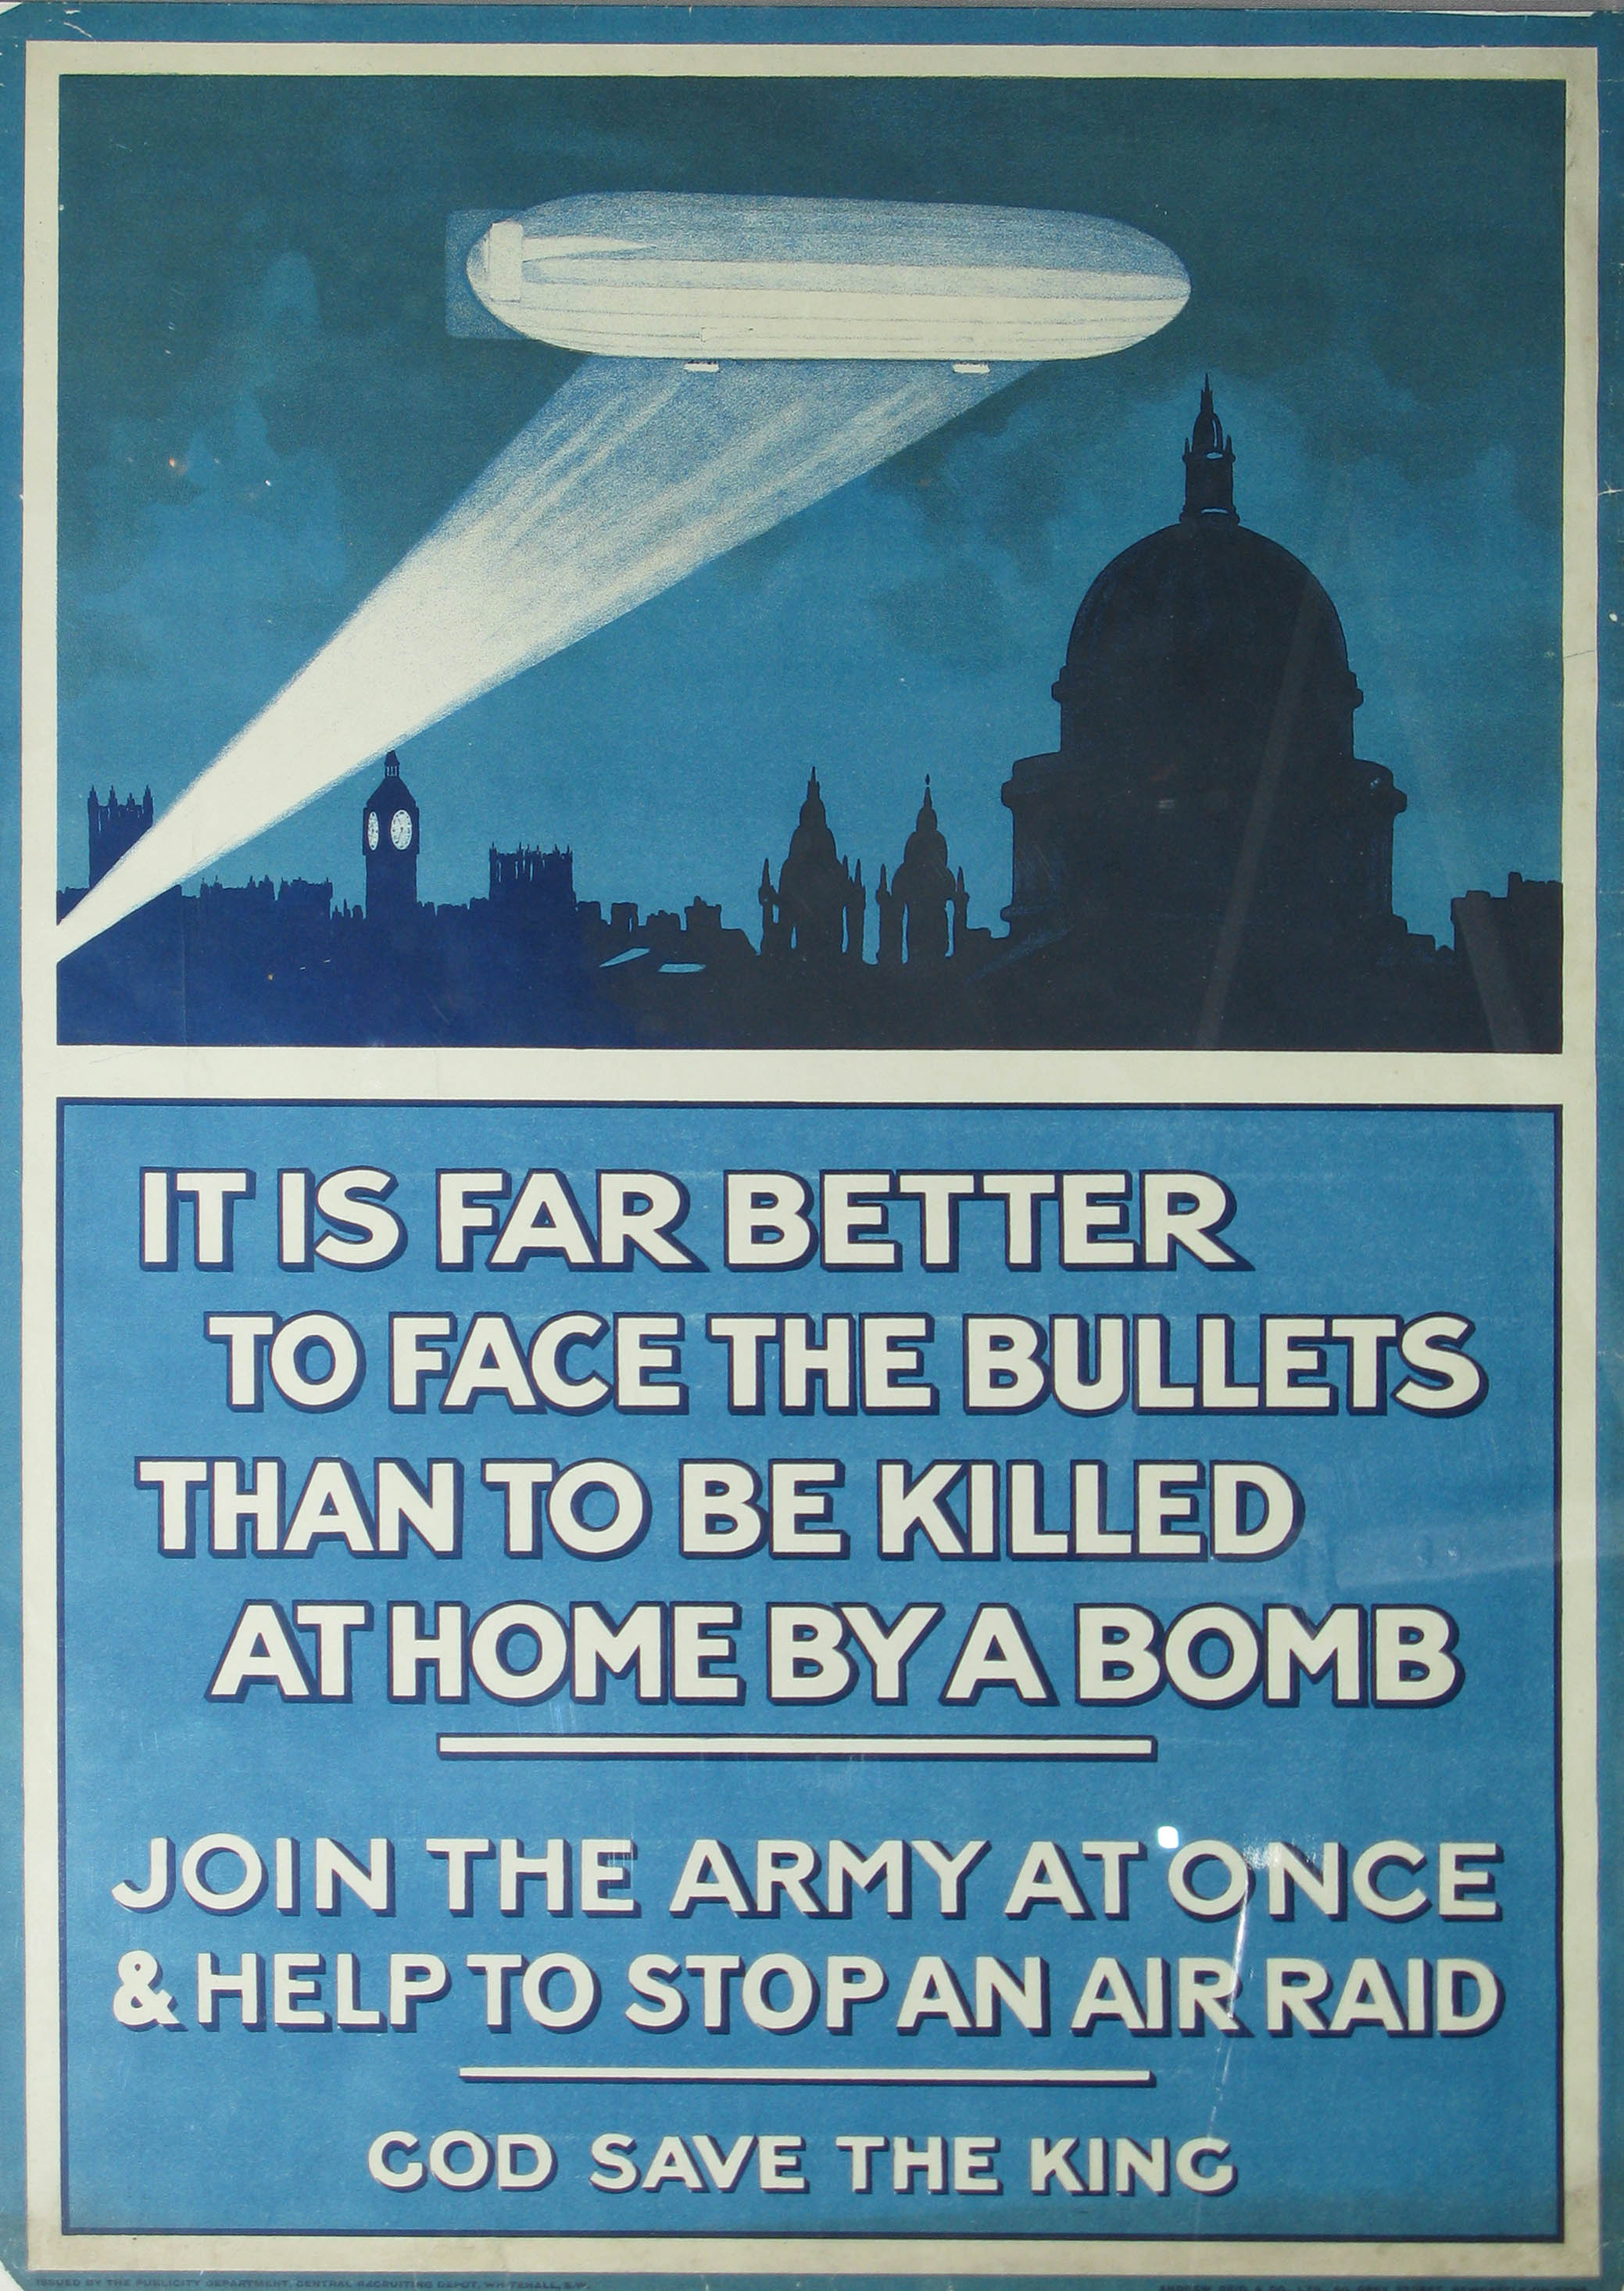 Wwi zeppelin poster - Join the Army. Avoid getting killed by a bomb. Brilliant!